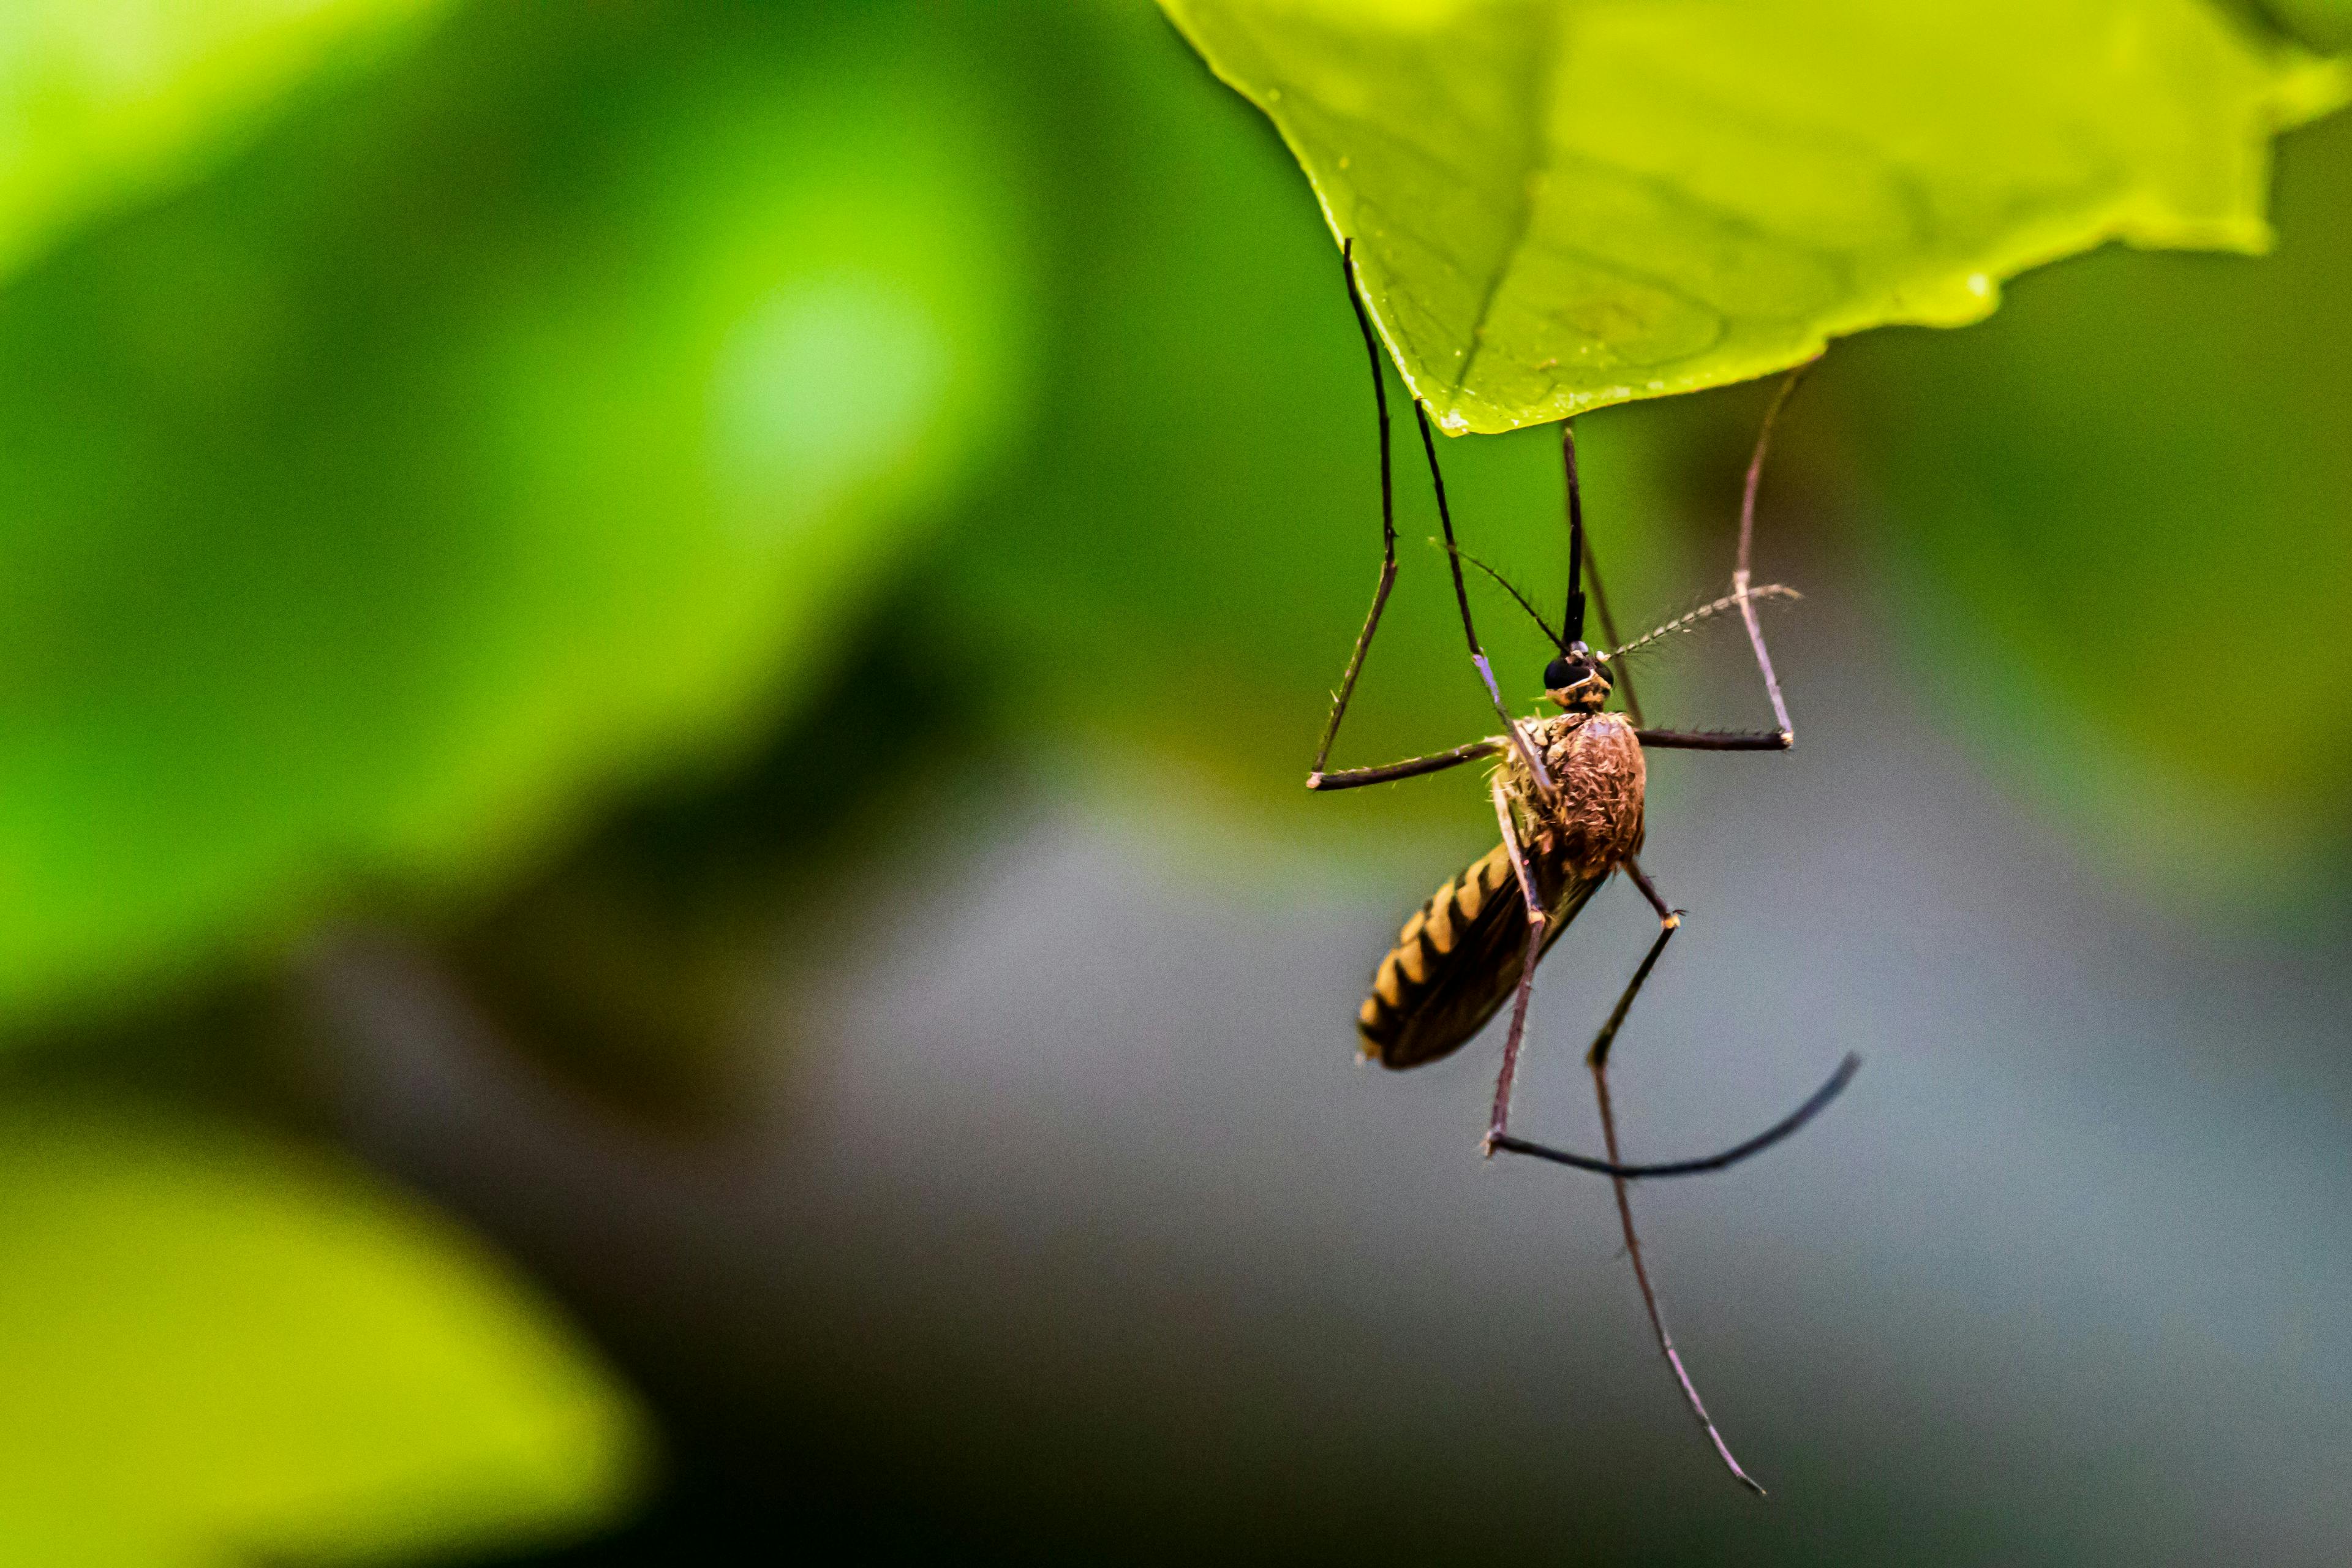  They Have Arrrived: Facts and Myths about Mosquito Prevention